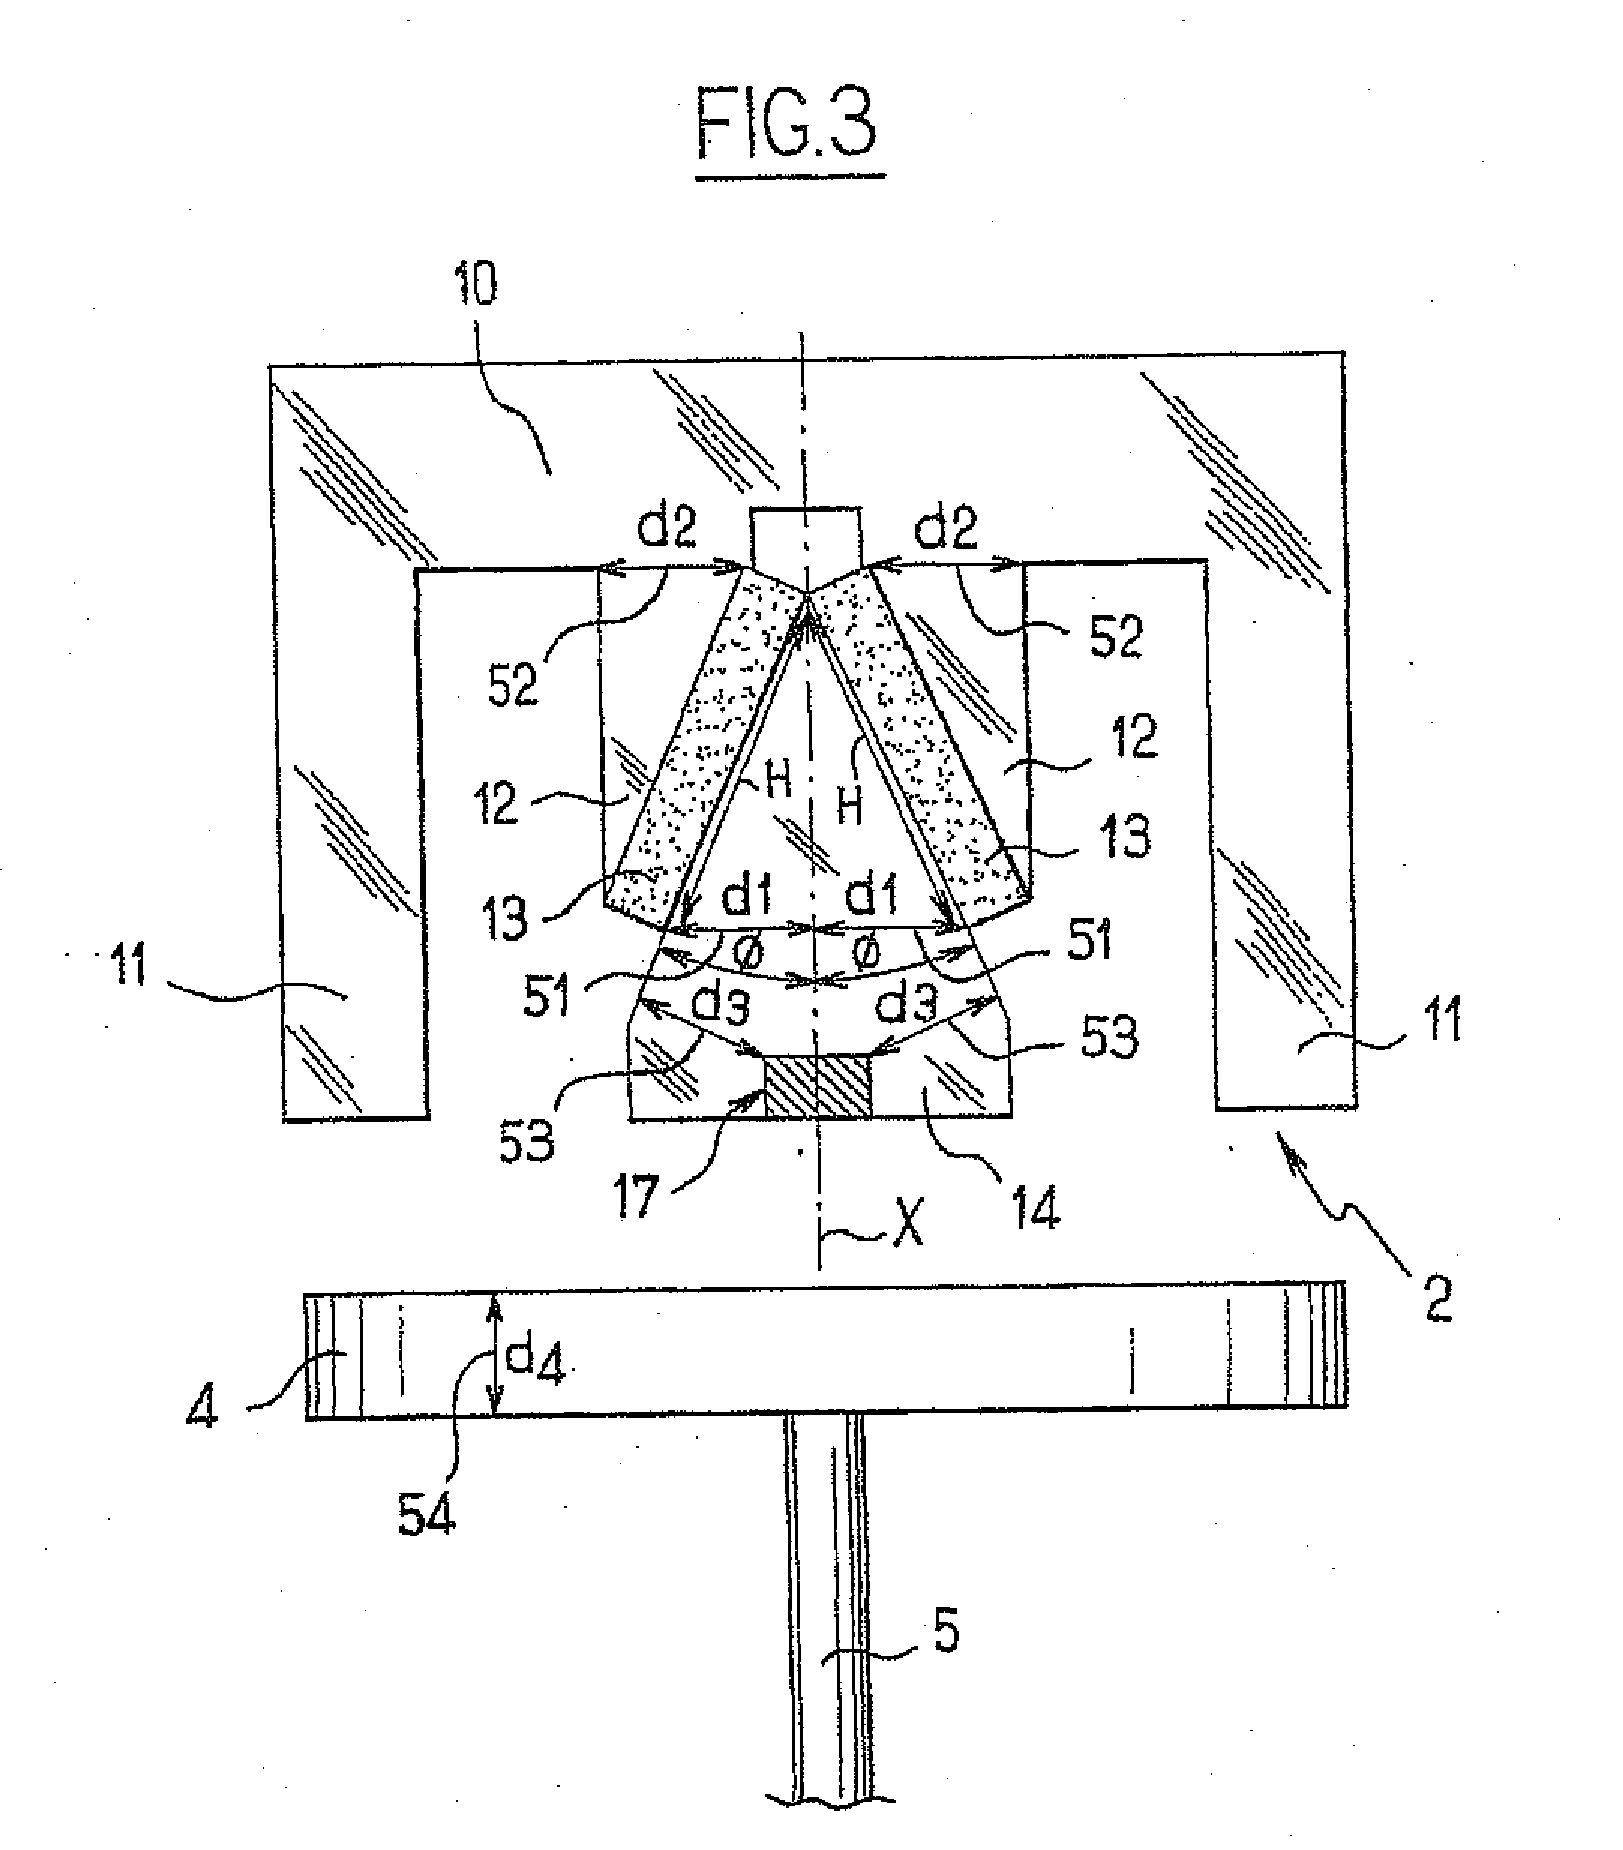 Electromagnetic actuator having permanent magnets placed in the form of a v in an electromagnetically optimized arrangement